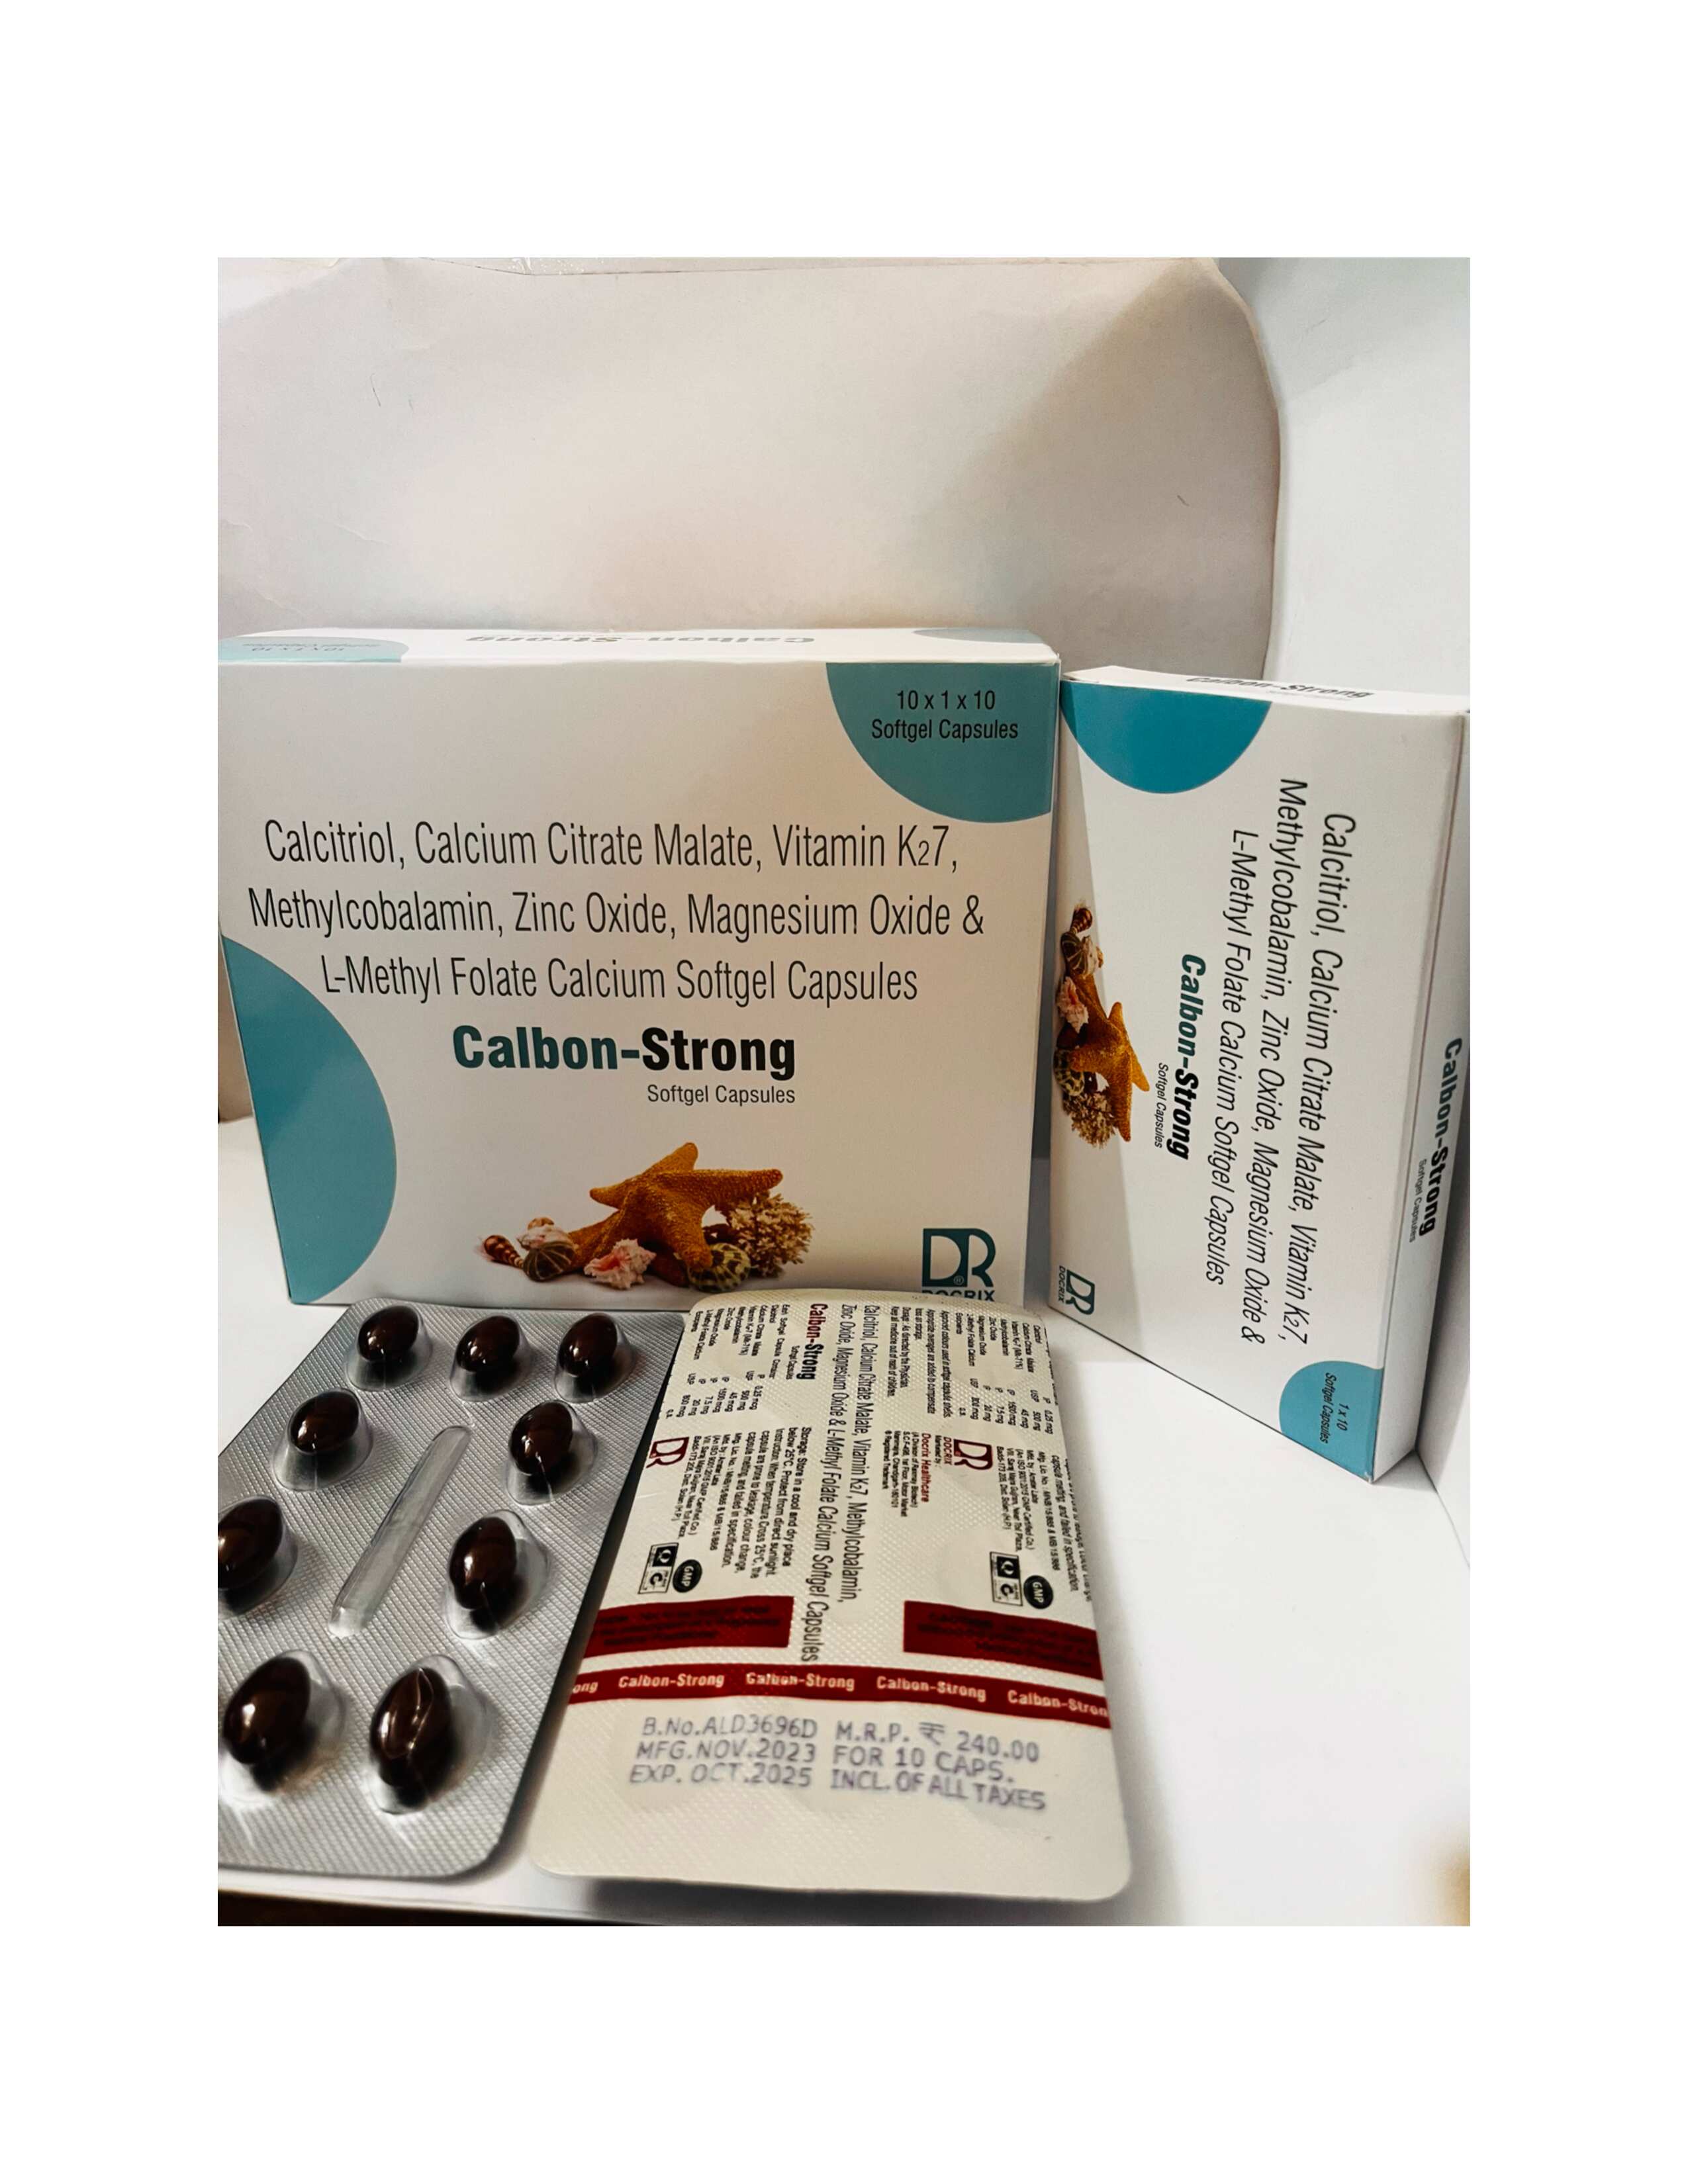 Product Name: Calbon Strong, Compositions of Calbon Strong are Calcitriol, Calcium Citrate Malate, Vitamin K7, Methylcobalamin , Zinc Oxide, Magnesium Oxide & L-Methyl Folate Calcium Softgel Capsules - Docrix Healthcare